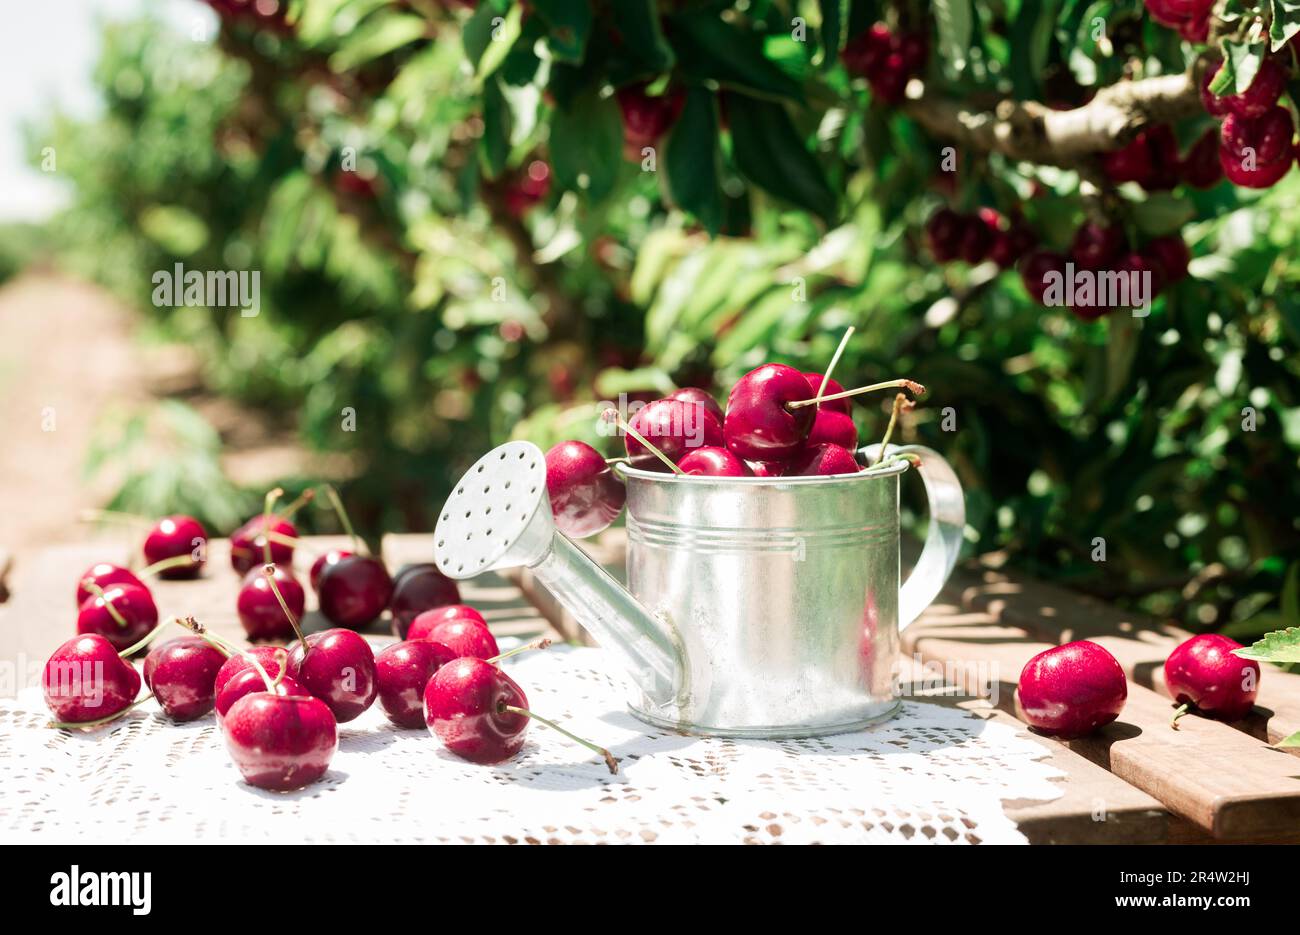 small tin can filled with ripe cherries on table against background of cherry trees with cherry berries Stock Photo